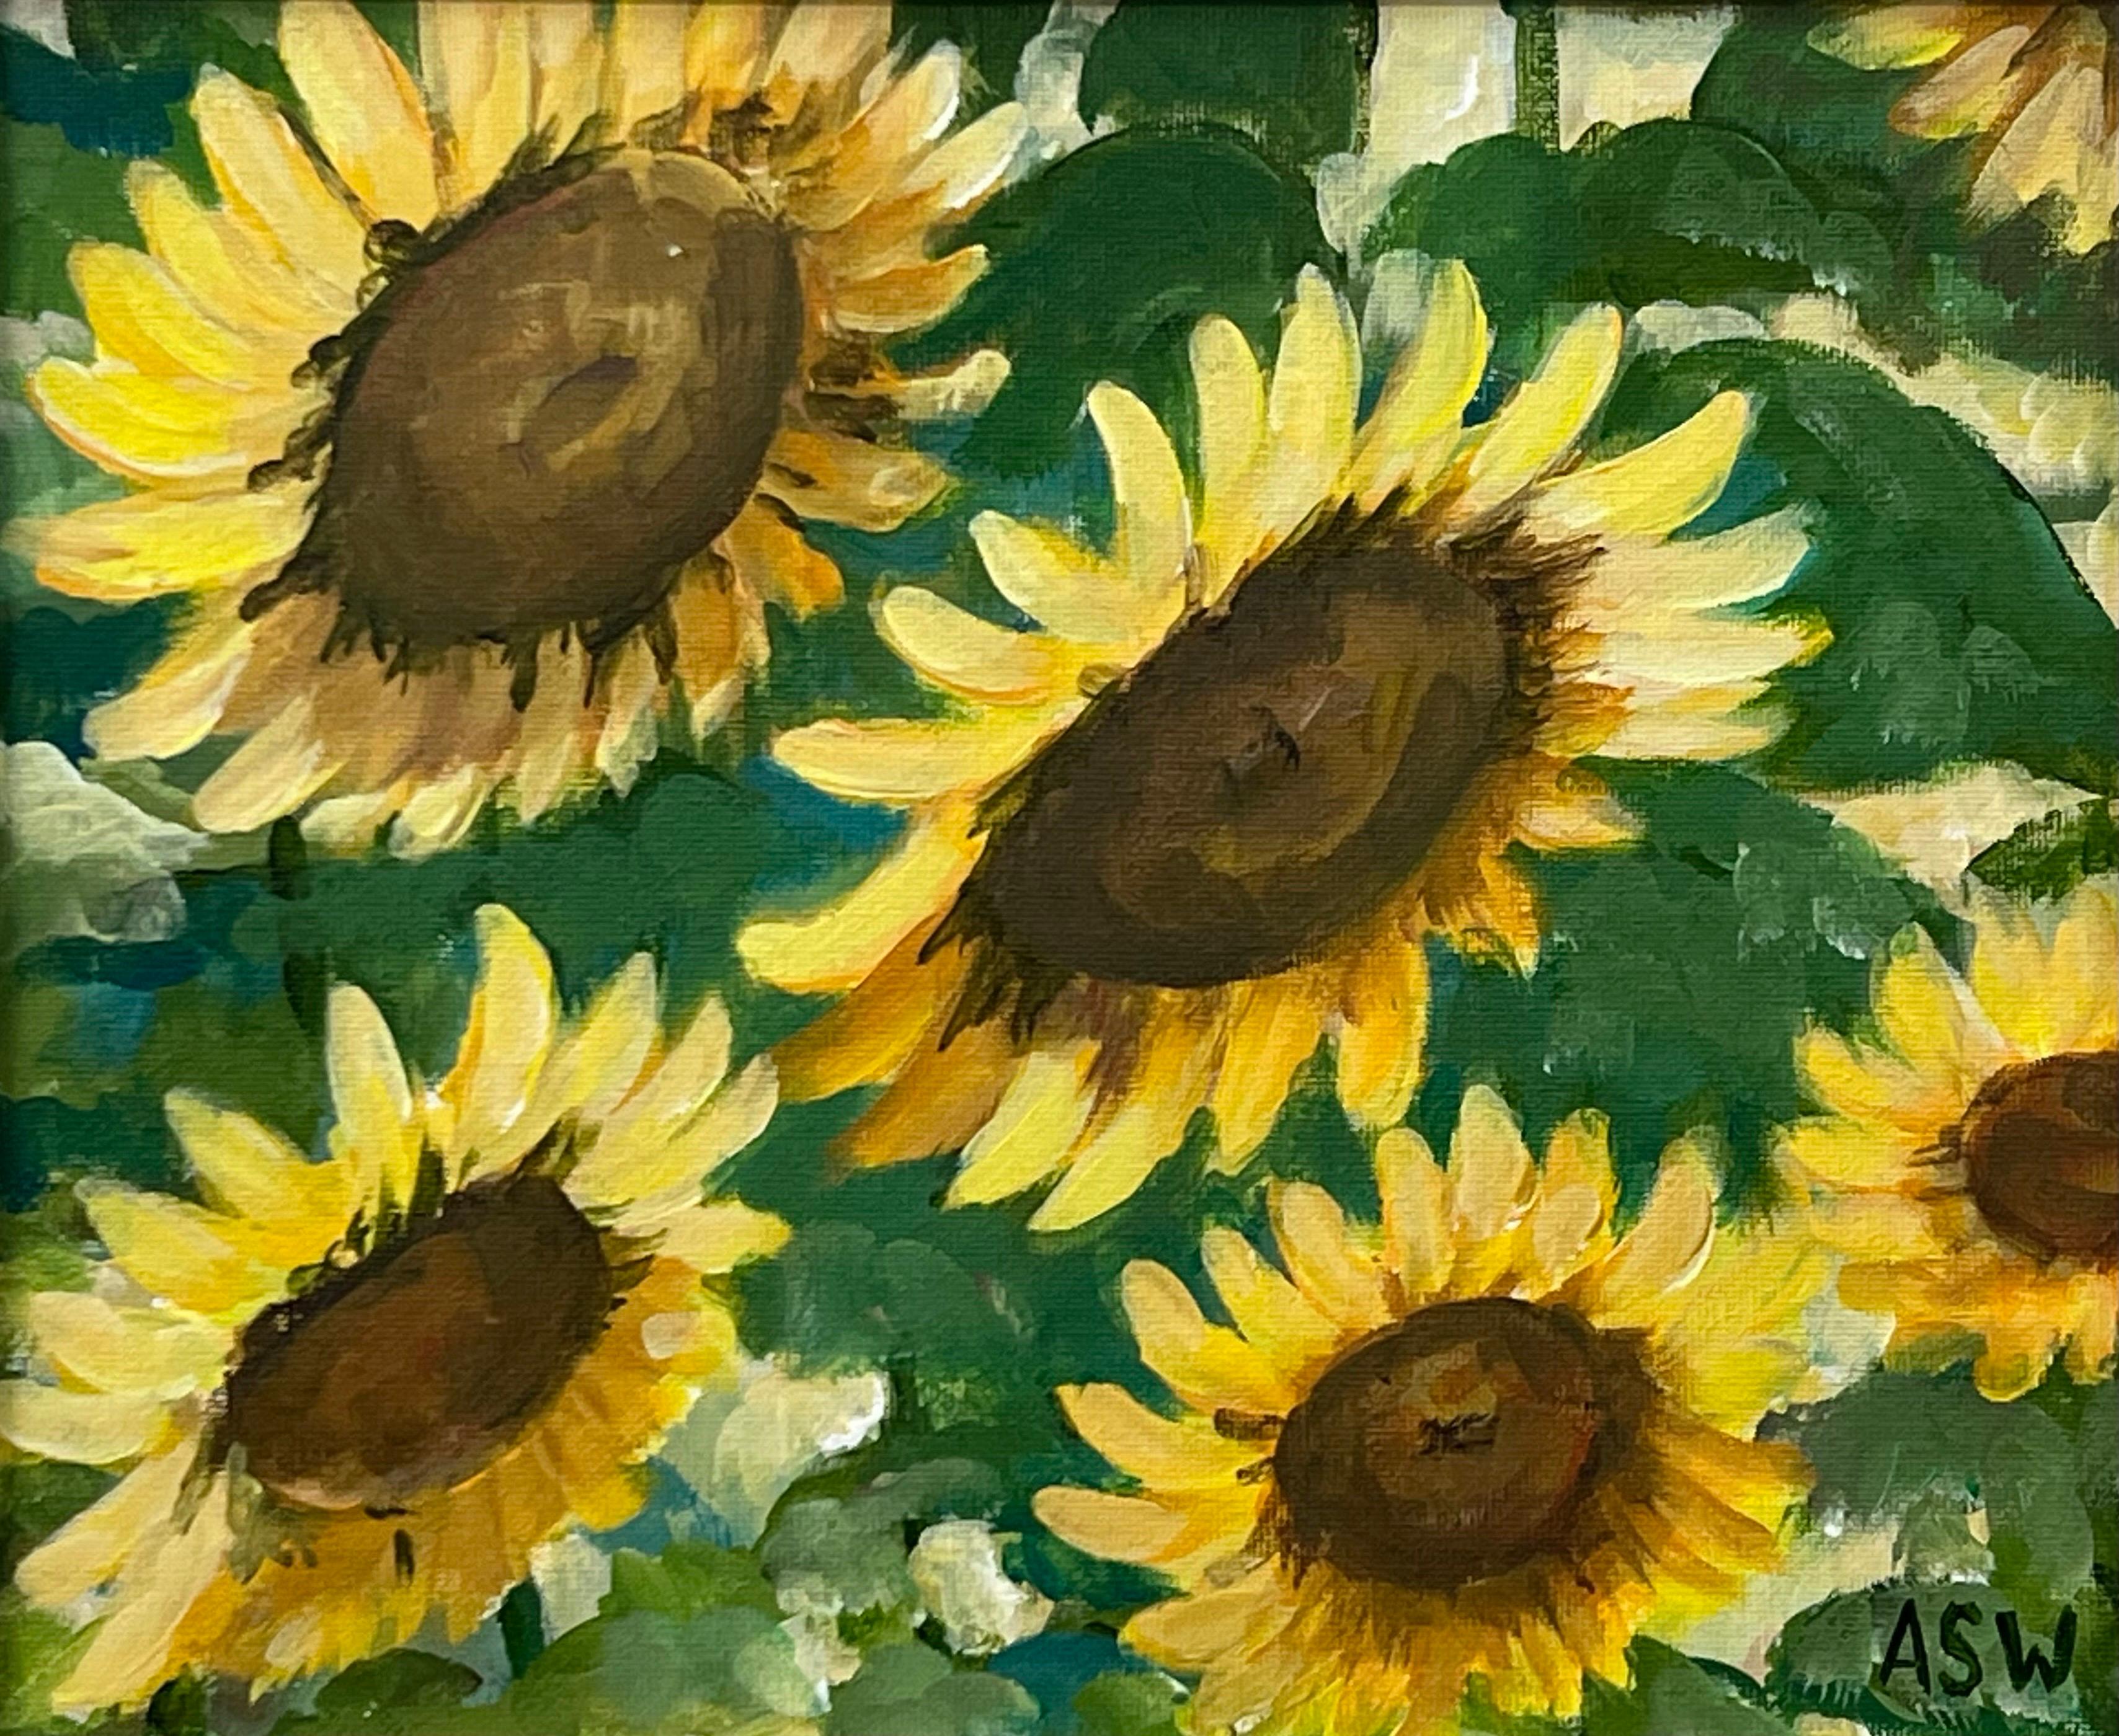 Golden Yellow Sunflowers Study on Green Background by Contemporary Artist For Sale 6